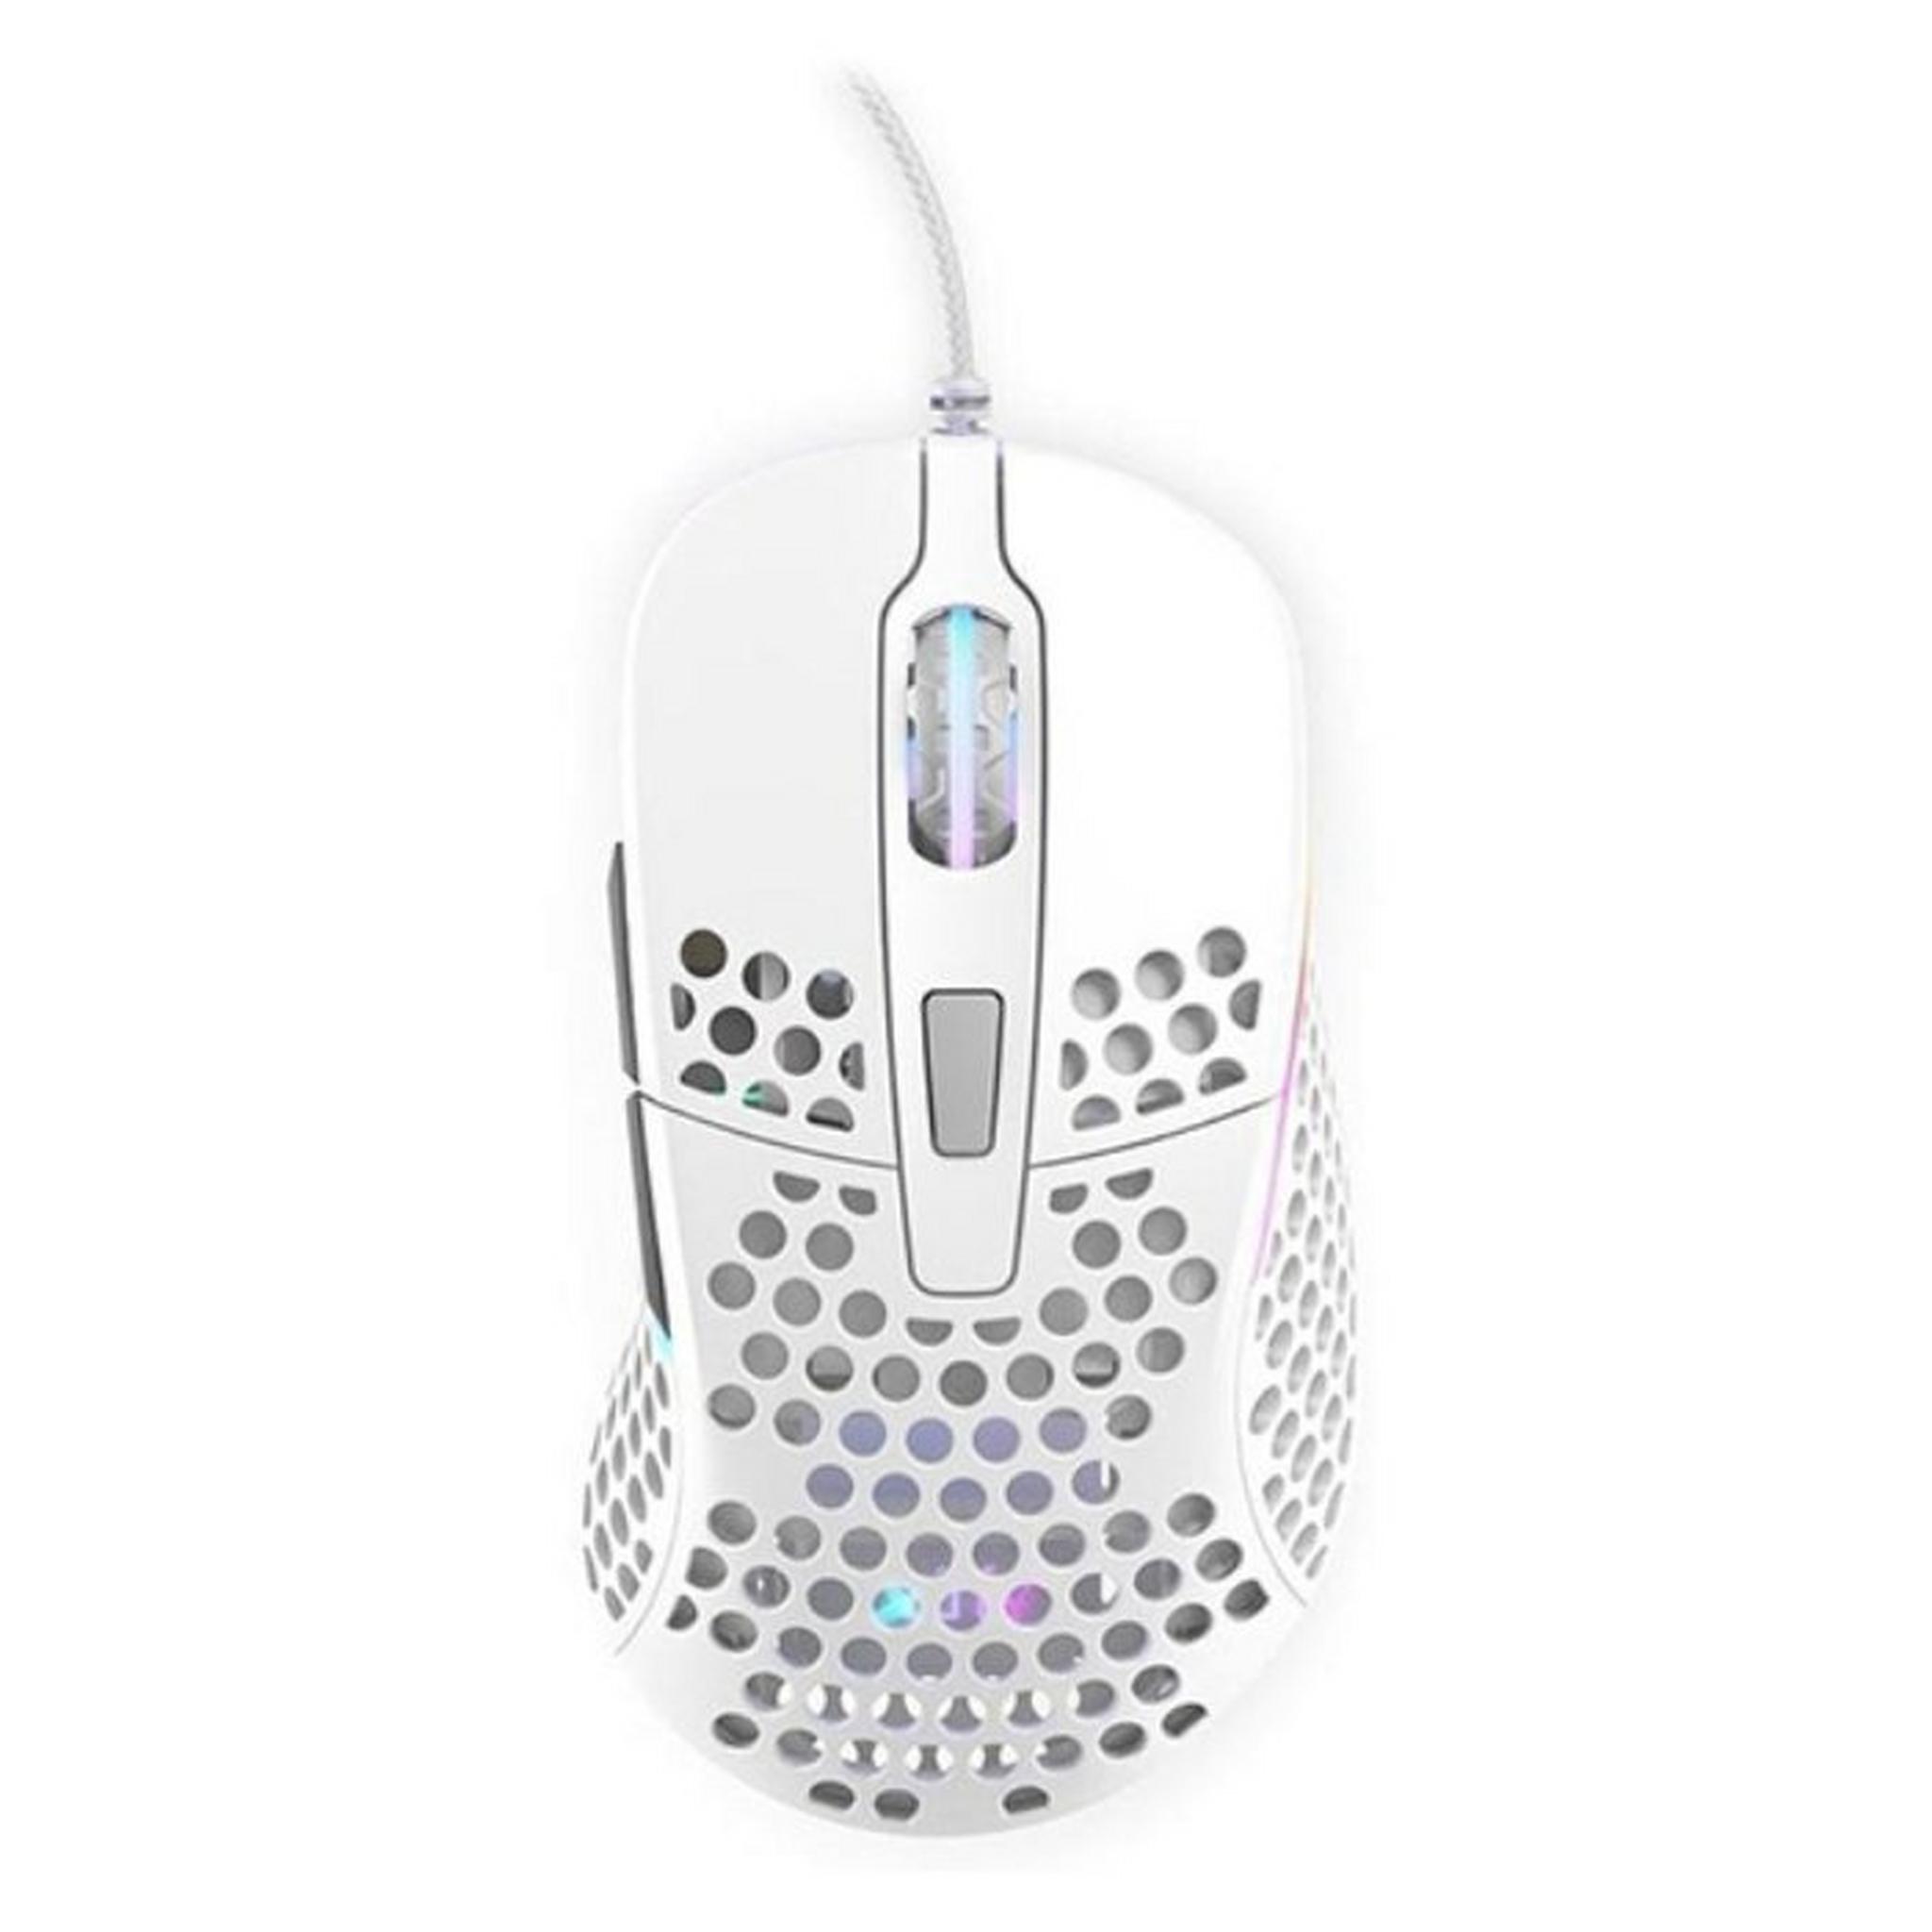 Xtrfy M4 RGB Wired Mouse - White